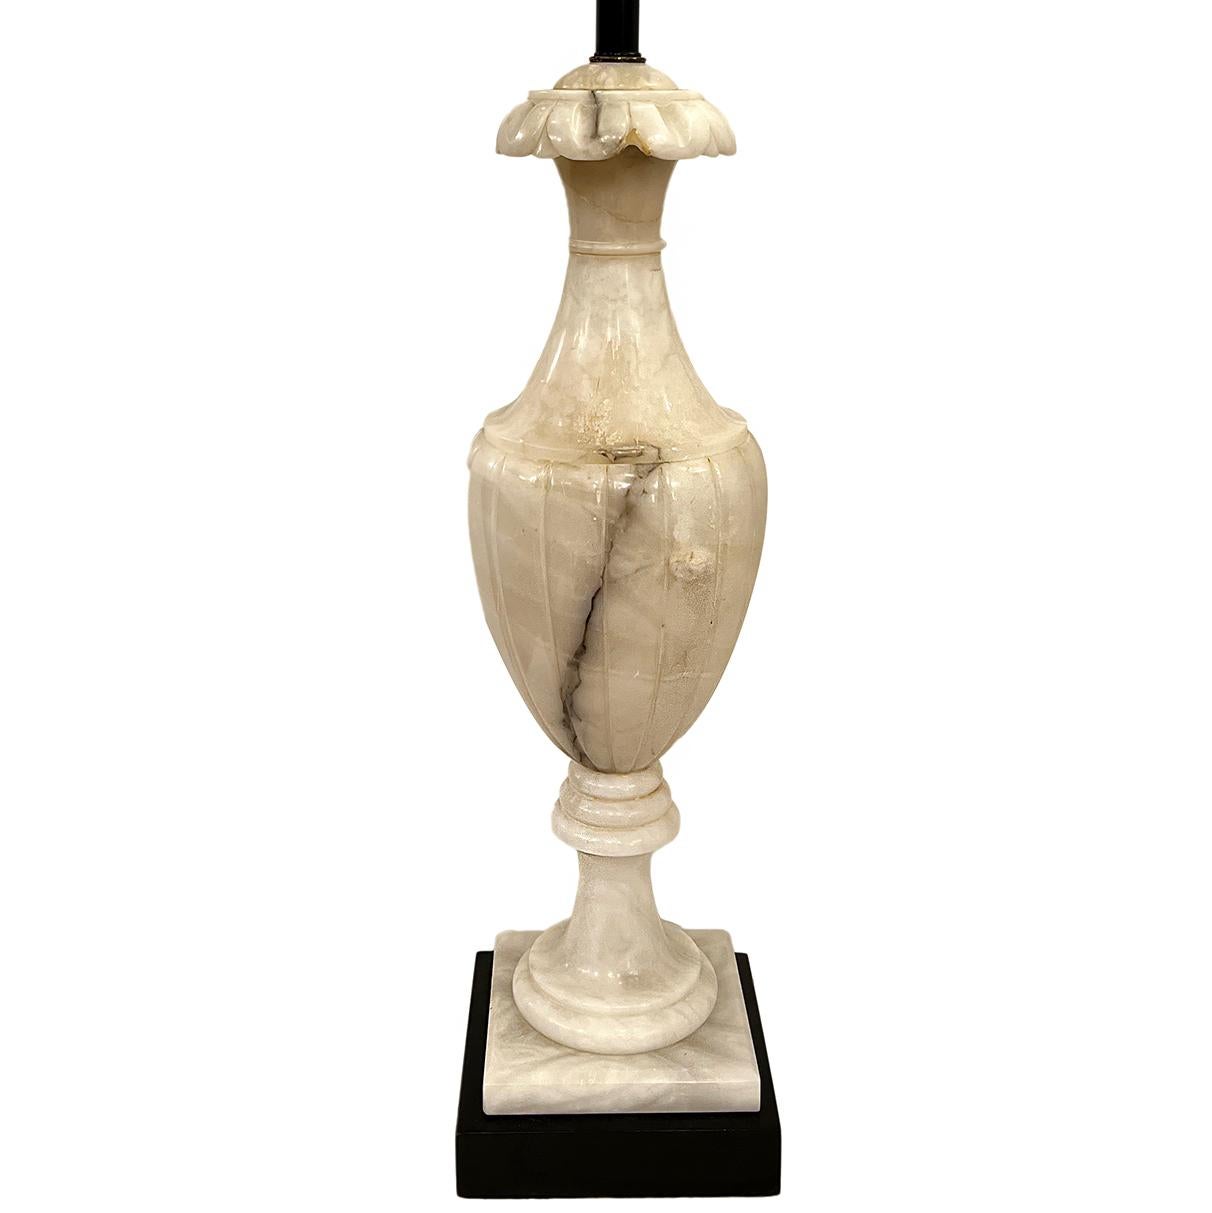 A single circa 1920's Italian carved alabaster table lamp.

Measurements:
Height of body: 29